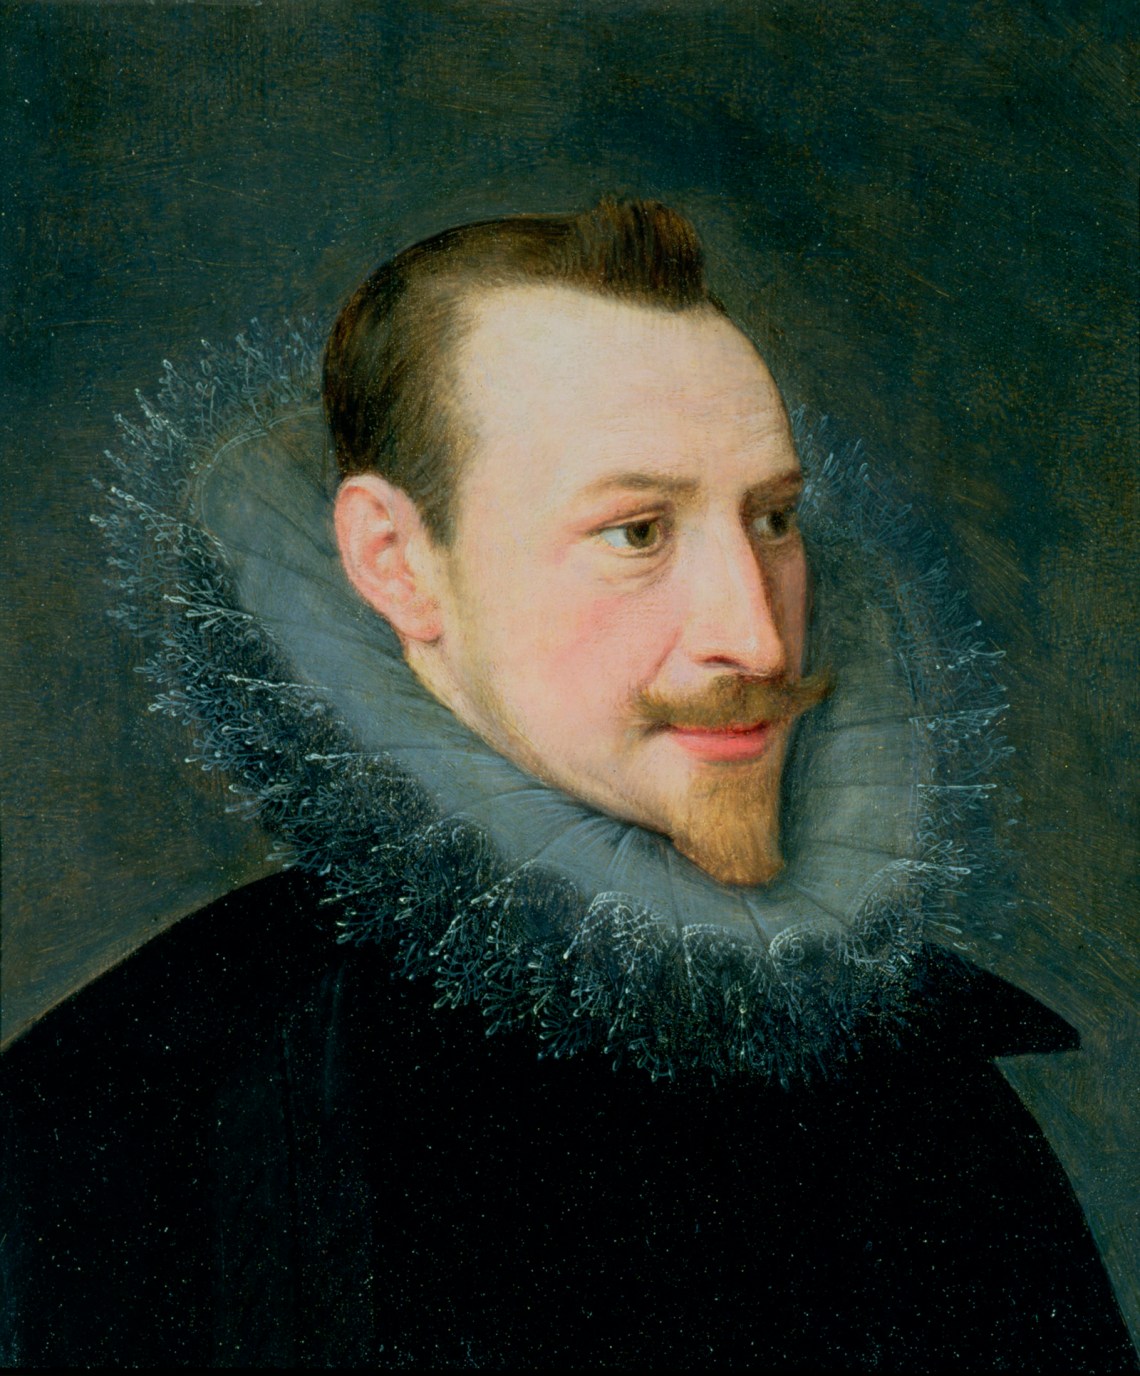 A portrait traditionally considered to be of Edmund Spenser, though disputed by modern scholars